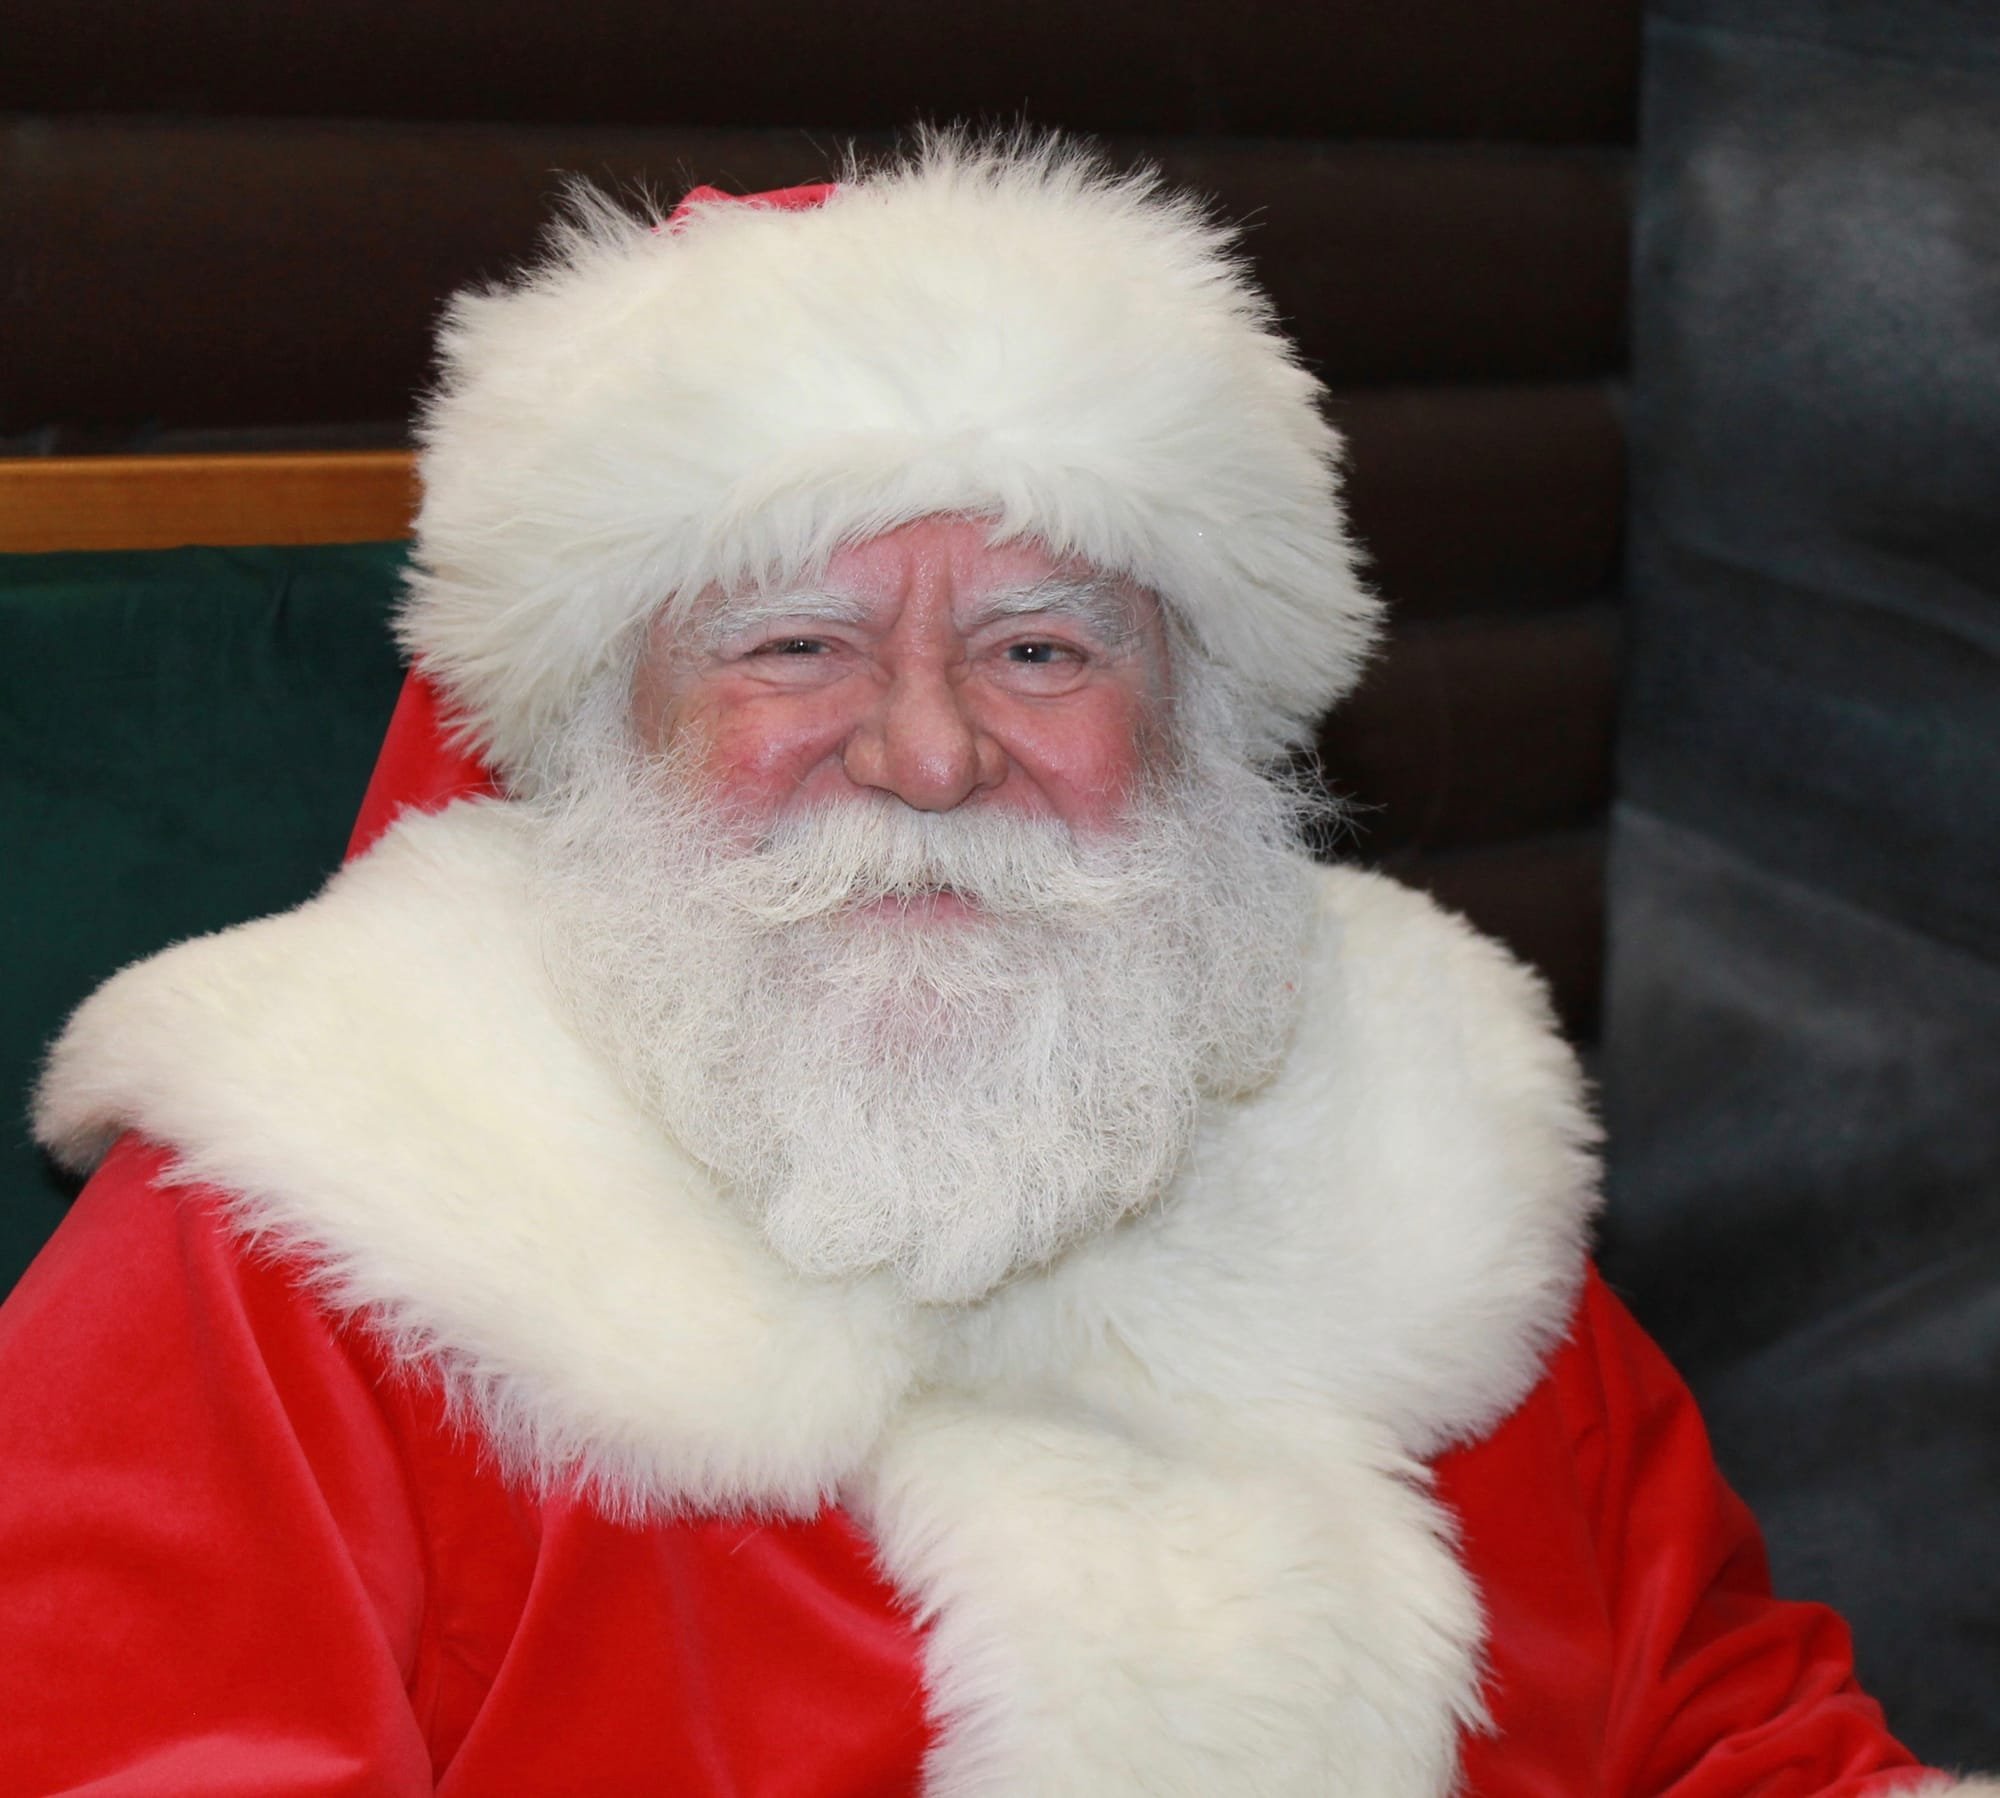 Edmonton Santa for hire; creating unforgettable memories, one ho-ho-ho at a time!